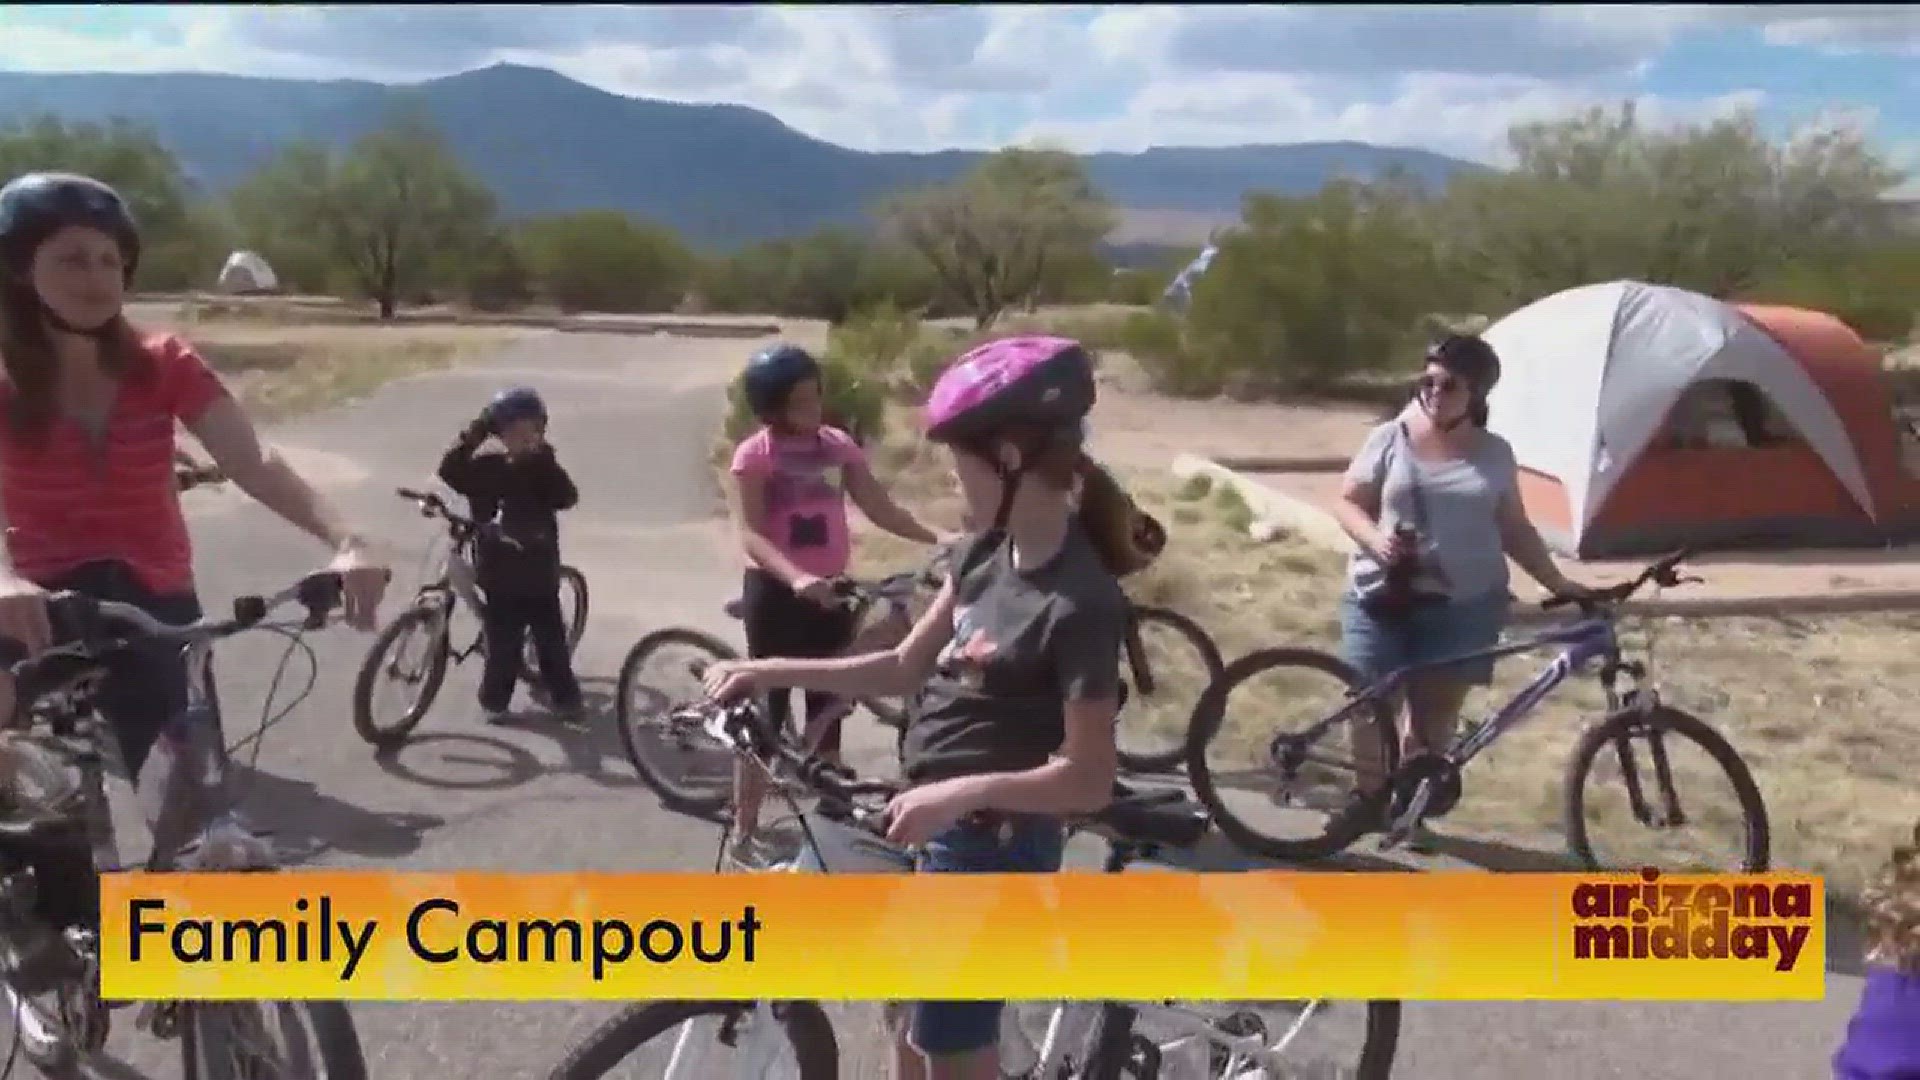 Find out how Arizona State Parks' Family Campout Program can help you and your family if you're new to camping.